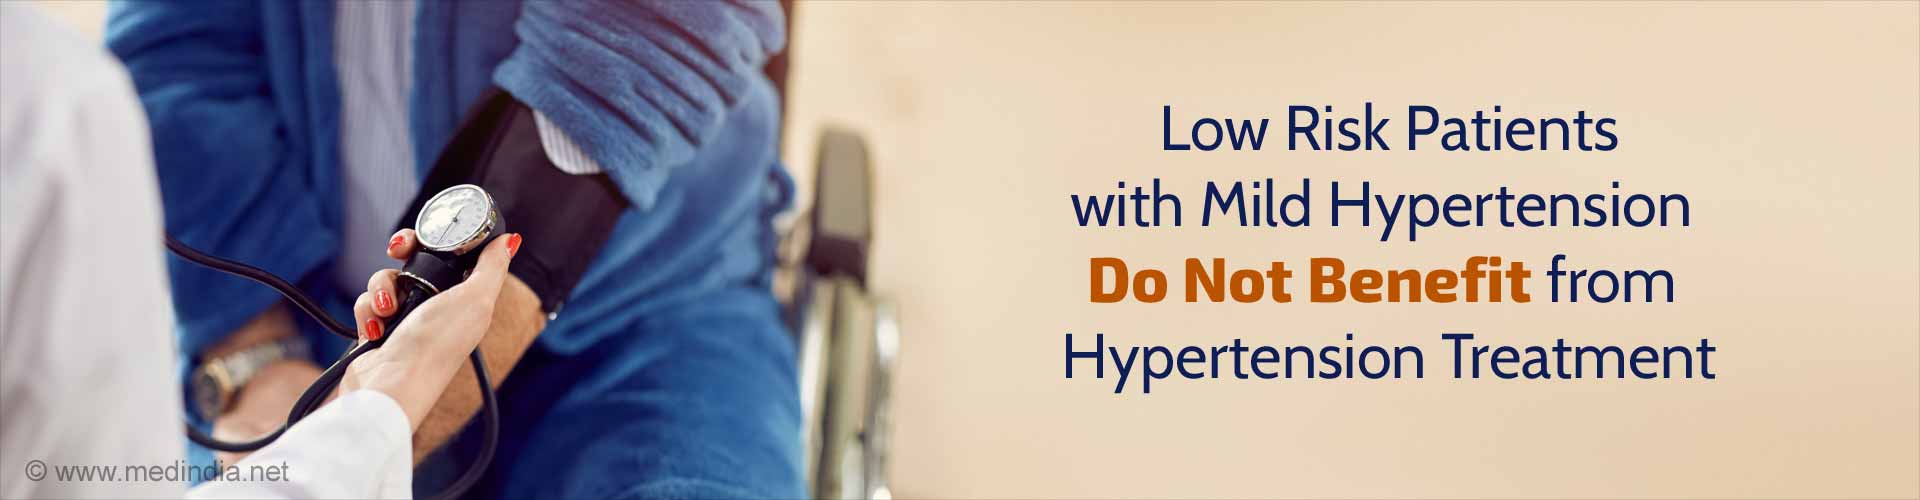 Low risk patients with mild hypertension do not benefit from hypertension treatment.